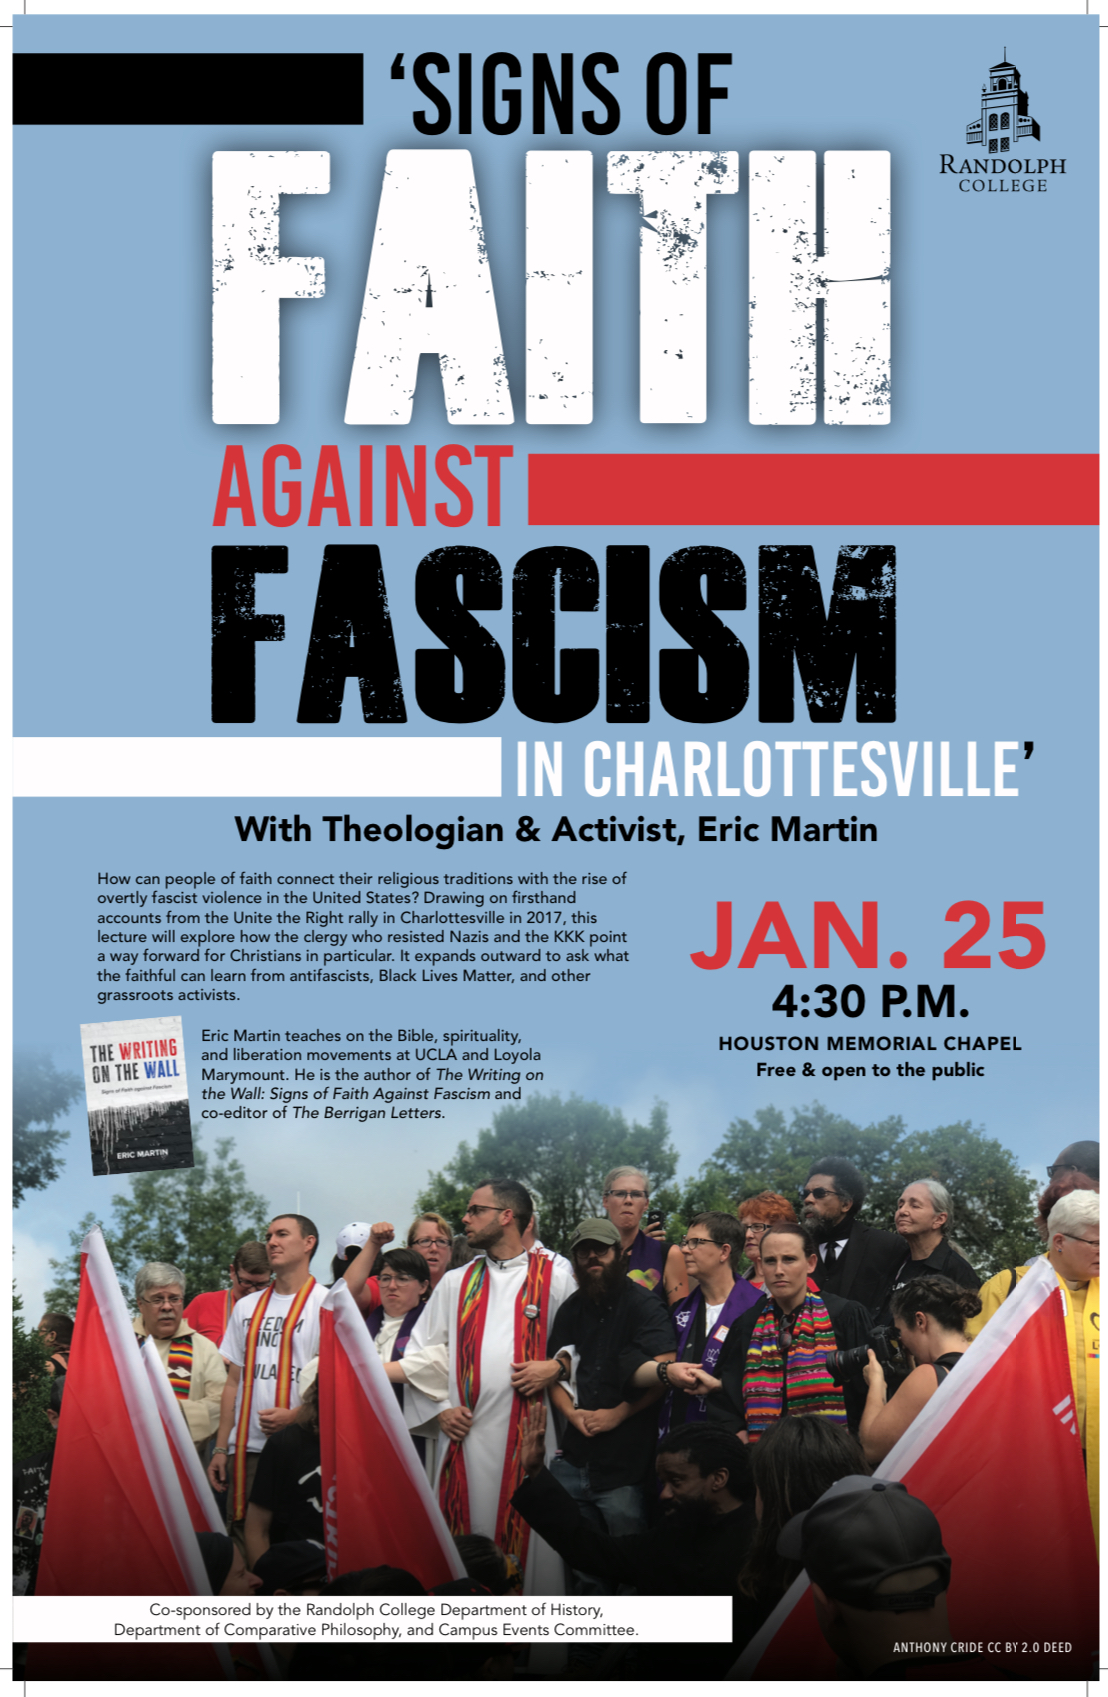 Poster for Signs of Faith Against Fascism in Charlottesville. Includes a photograph of clergy protesting against the Unite the Right Rally. Text says: Signs of Faith Against Fascism in Charlottesville. With Theologian and Activist, Dr. Eric Martin. Jan. 25. 4:30 PM. Houston Memorial Chapel. Free & open to the public. How can people of faith connect their religious traditions with the rise of overtly fascist violence in the United States? Drawing on first-hand accounts from the Unite the Right rally in Charlottesville in 2017, this lecture will explore how the clergy who resisted Nazis and the KKK point a way forward for Christians in particular. It expands outward to ask what the faithful can learn from antifascists, Black Lives Matter, and other grassroots activists. Eric Martin teaches on the Bible, spirituality, and liberation movements at UCLA and Loyola Marymount. He is the author of The Writing on the Wall: Signs of Faith Against Fascism and co-editor of The Berrigan Letters. Co-sponsored by the Randolph College Department of History, Department of Comparative Philosophy, and Campus Events Committee.